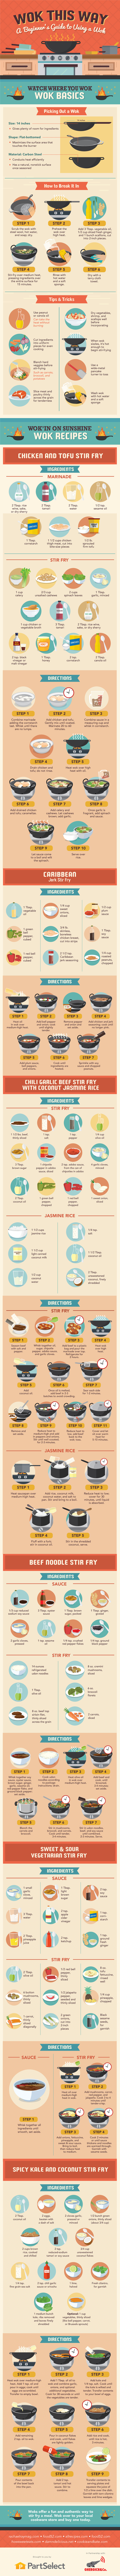 How to Become a Wok-Pro: Beginners Guide to Using a Wok - Infographic